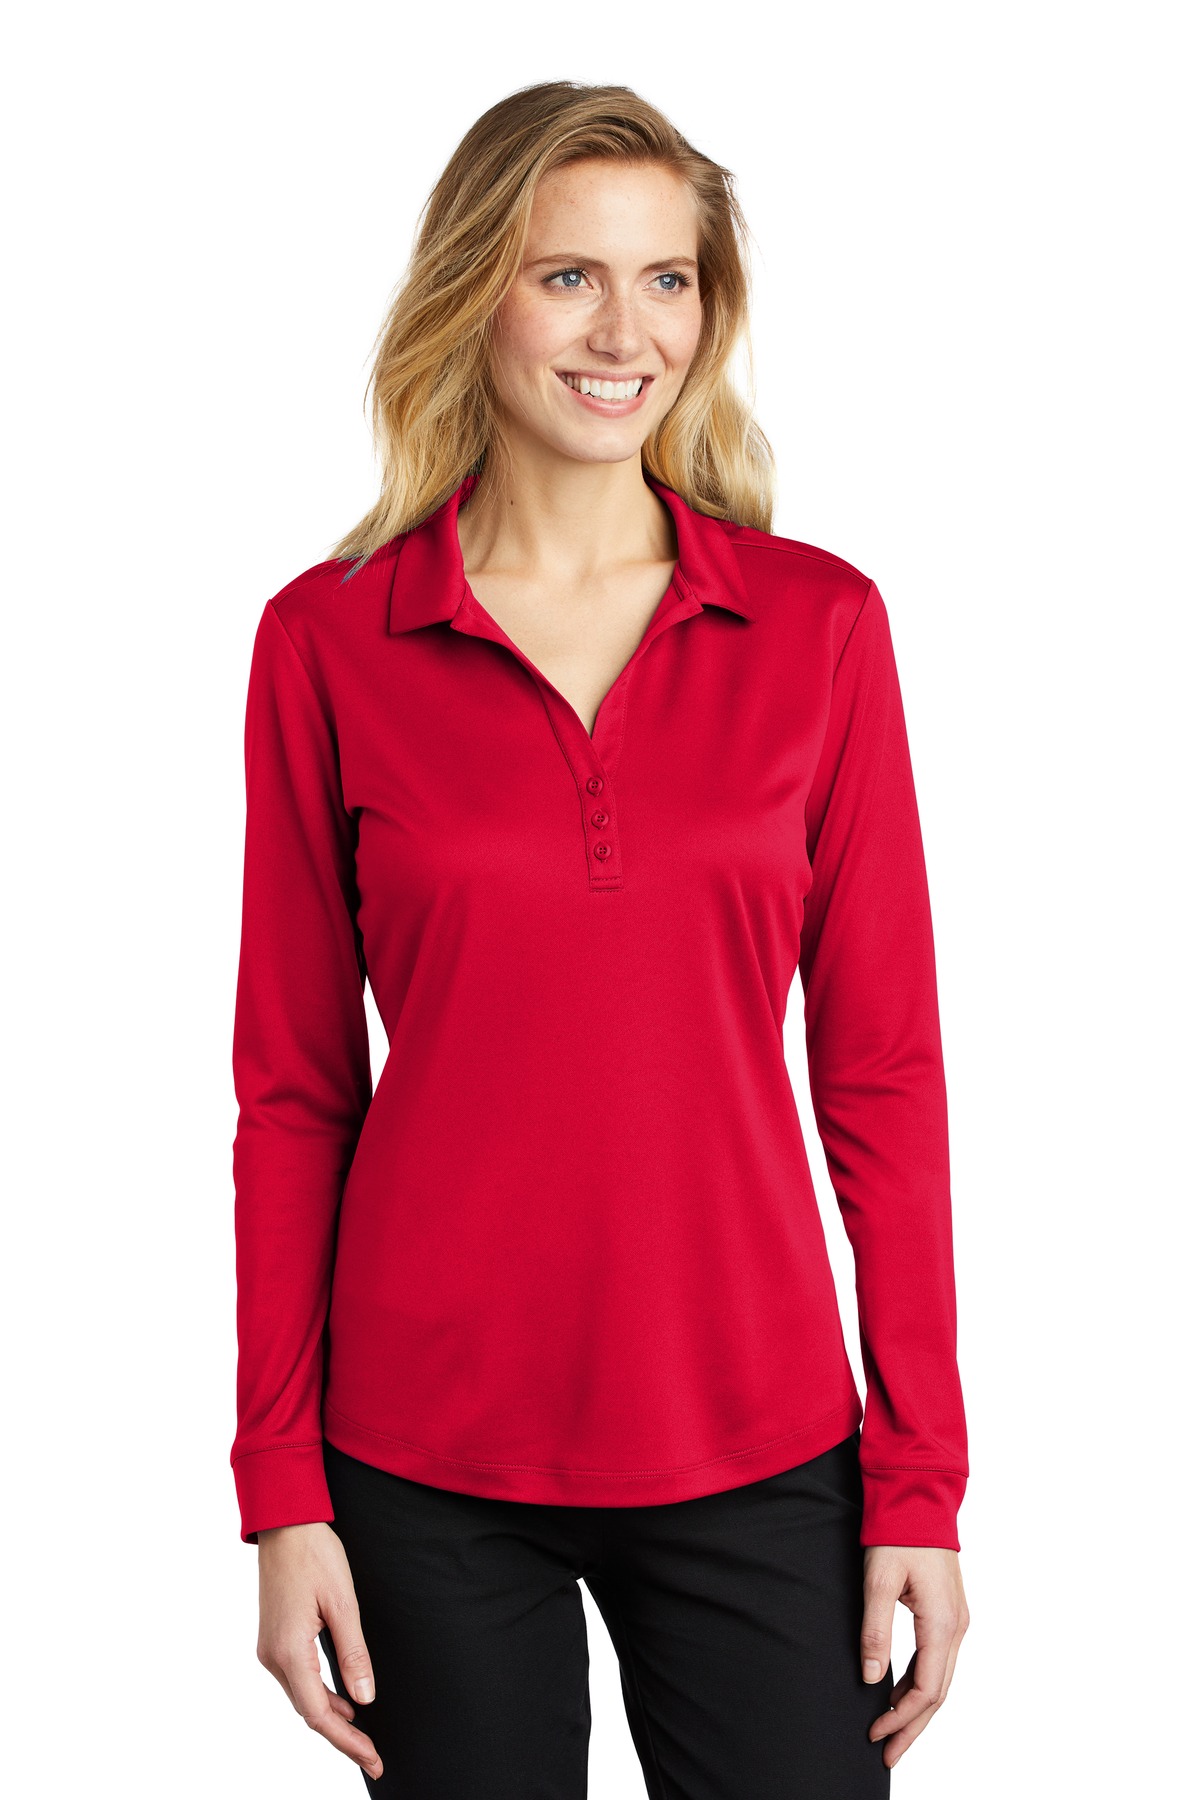 Port Authority Adult Female Women Y-neck Plain Long Sleeves Polo Red Medium - image 1 of 4